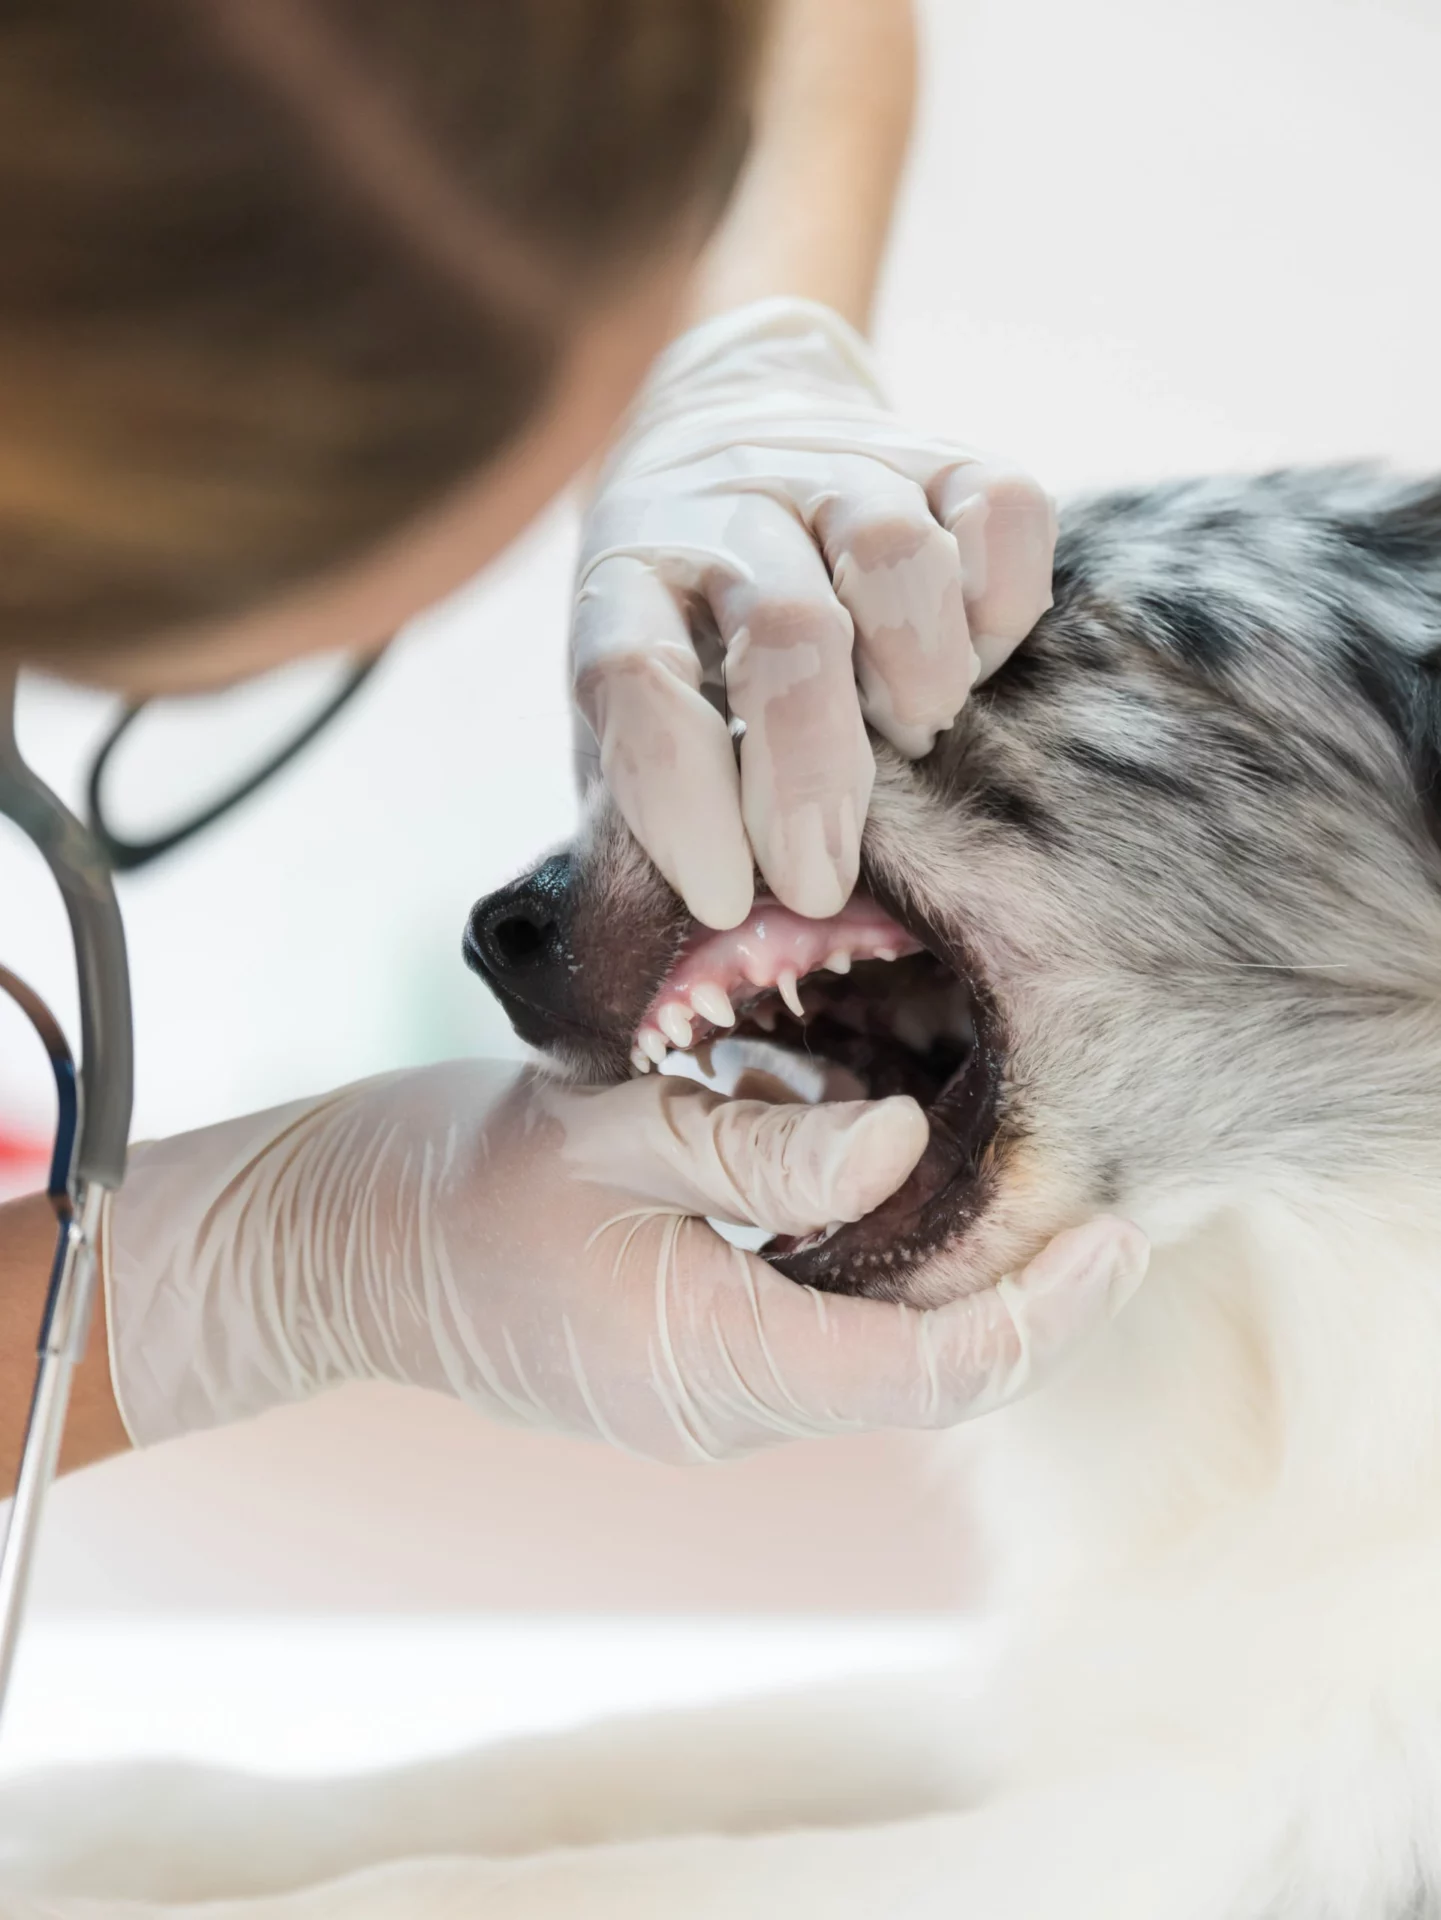 A veterinarian inspecting dog's teeth in a clinic